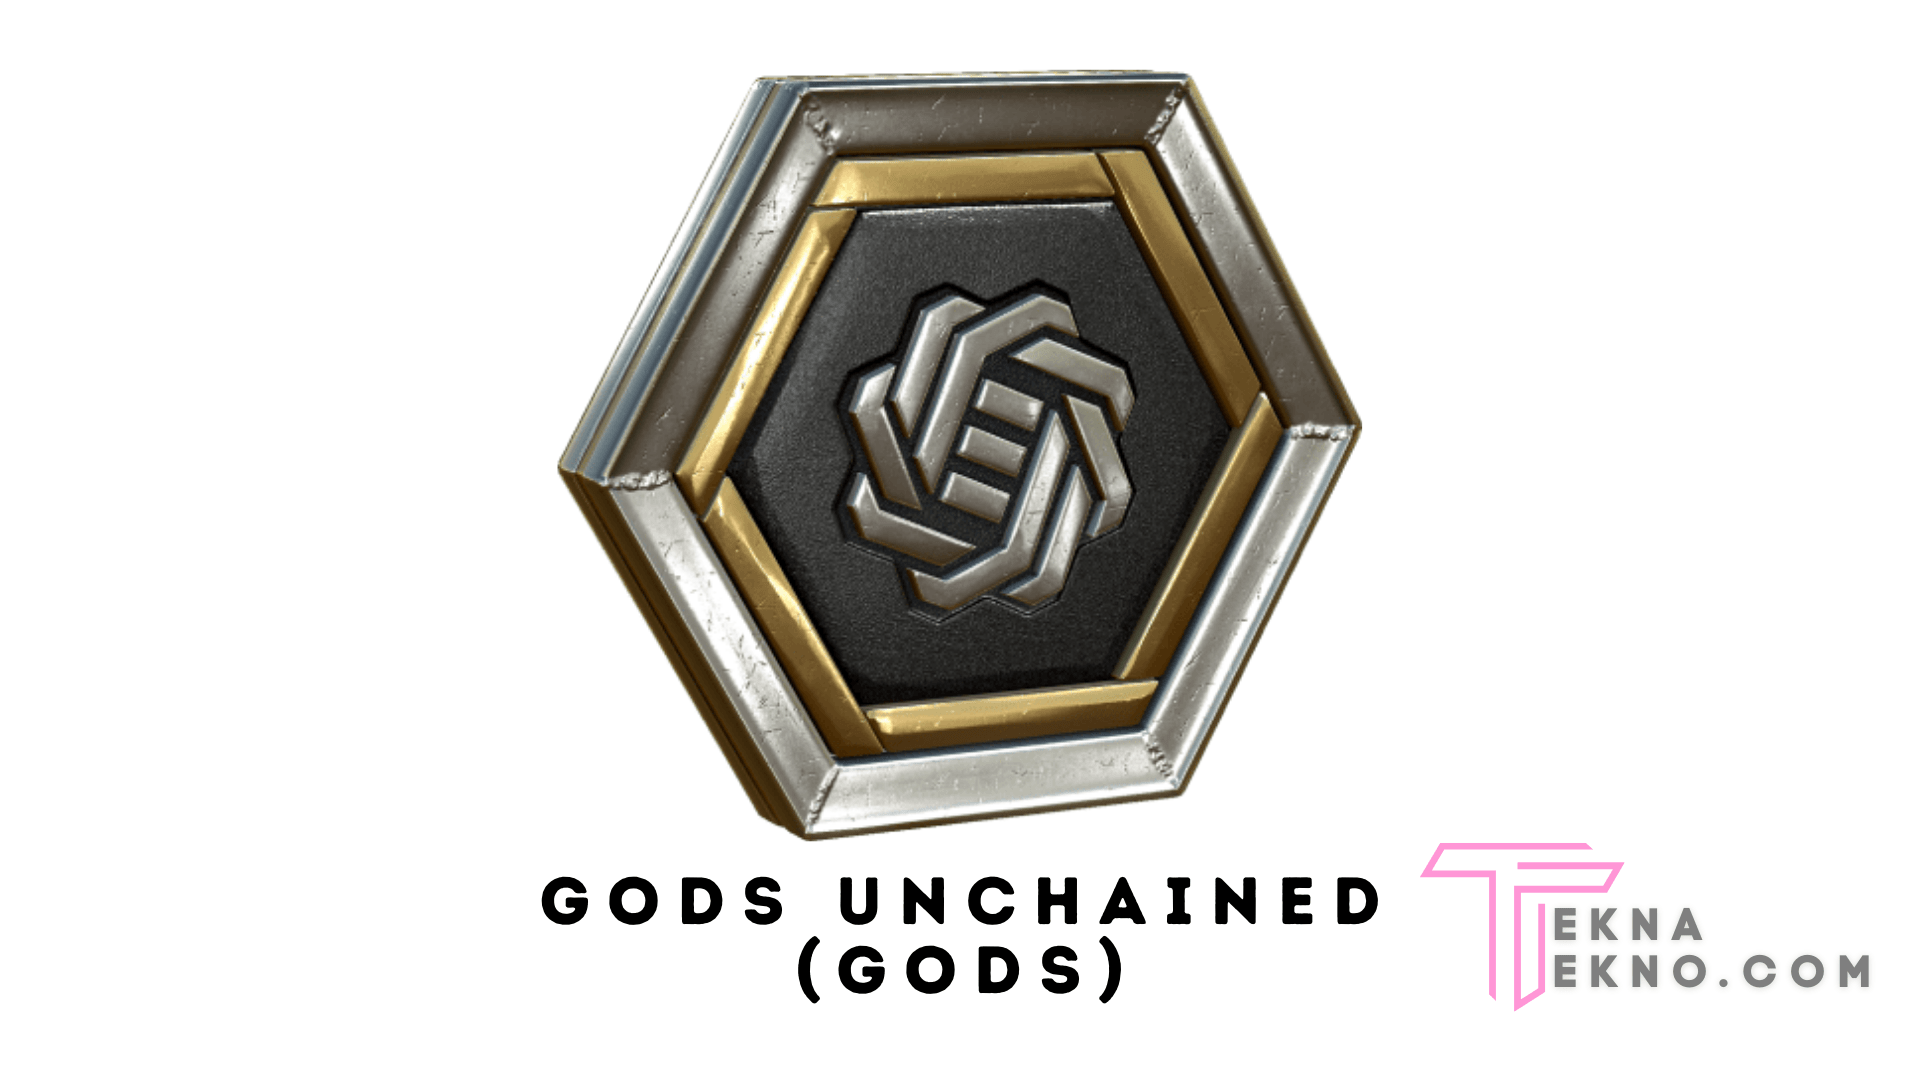 Mengenal Game Gods Unchained